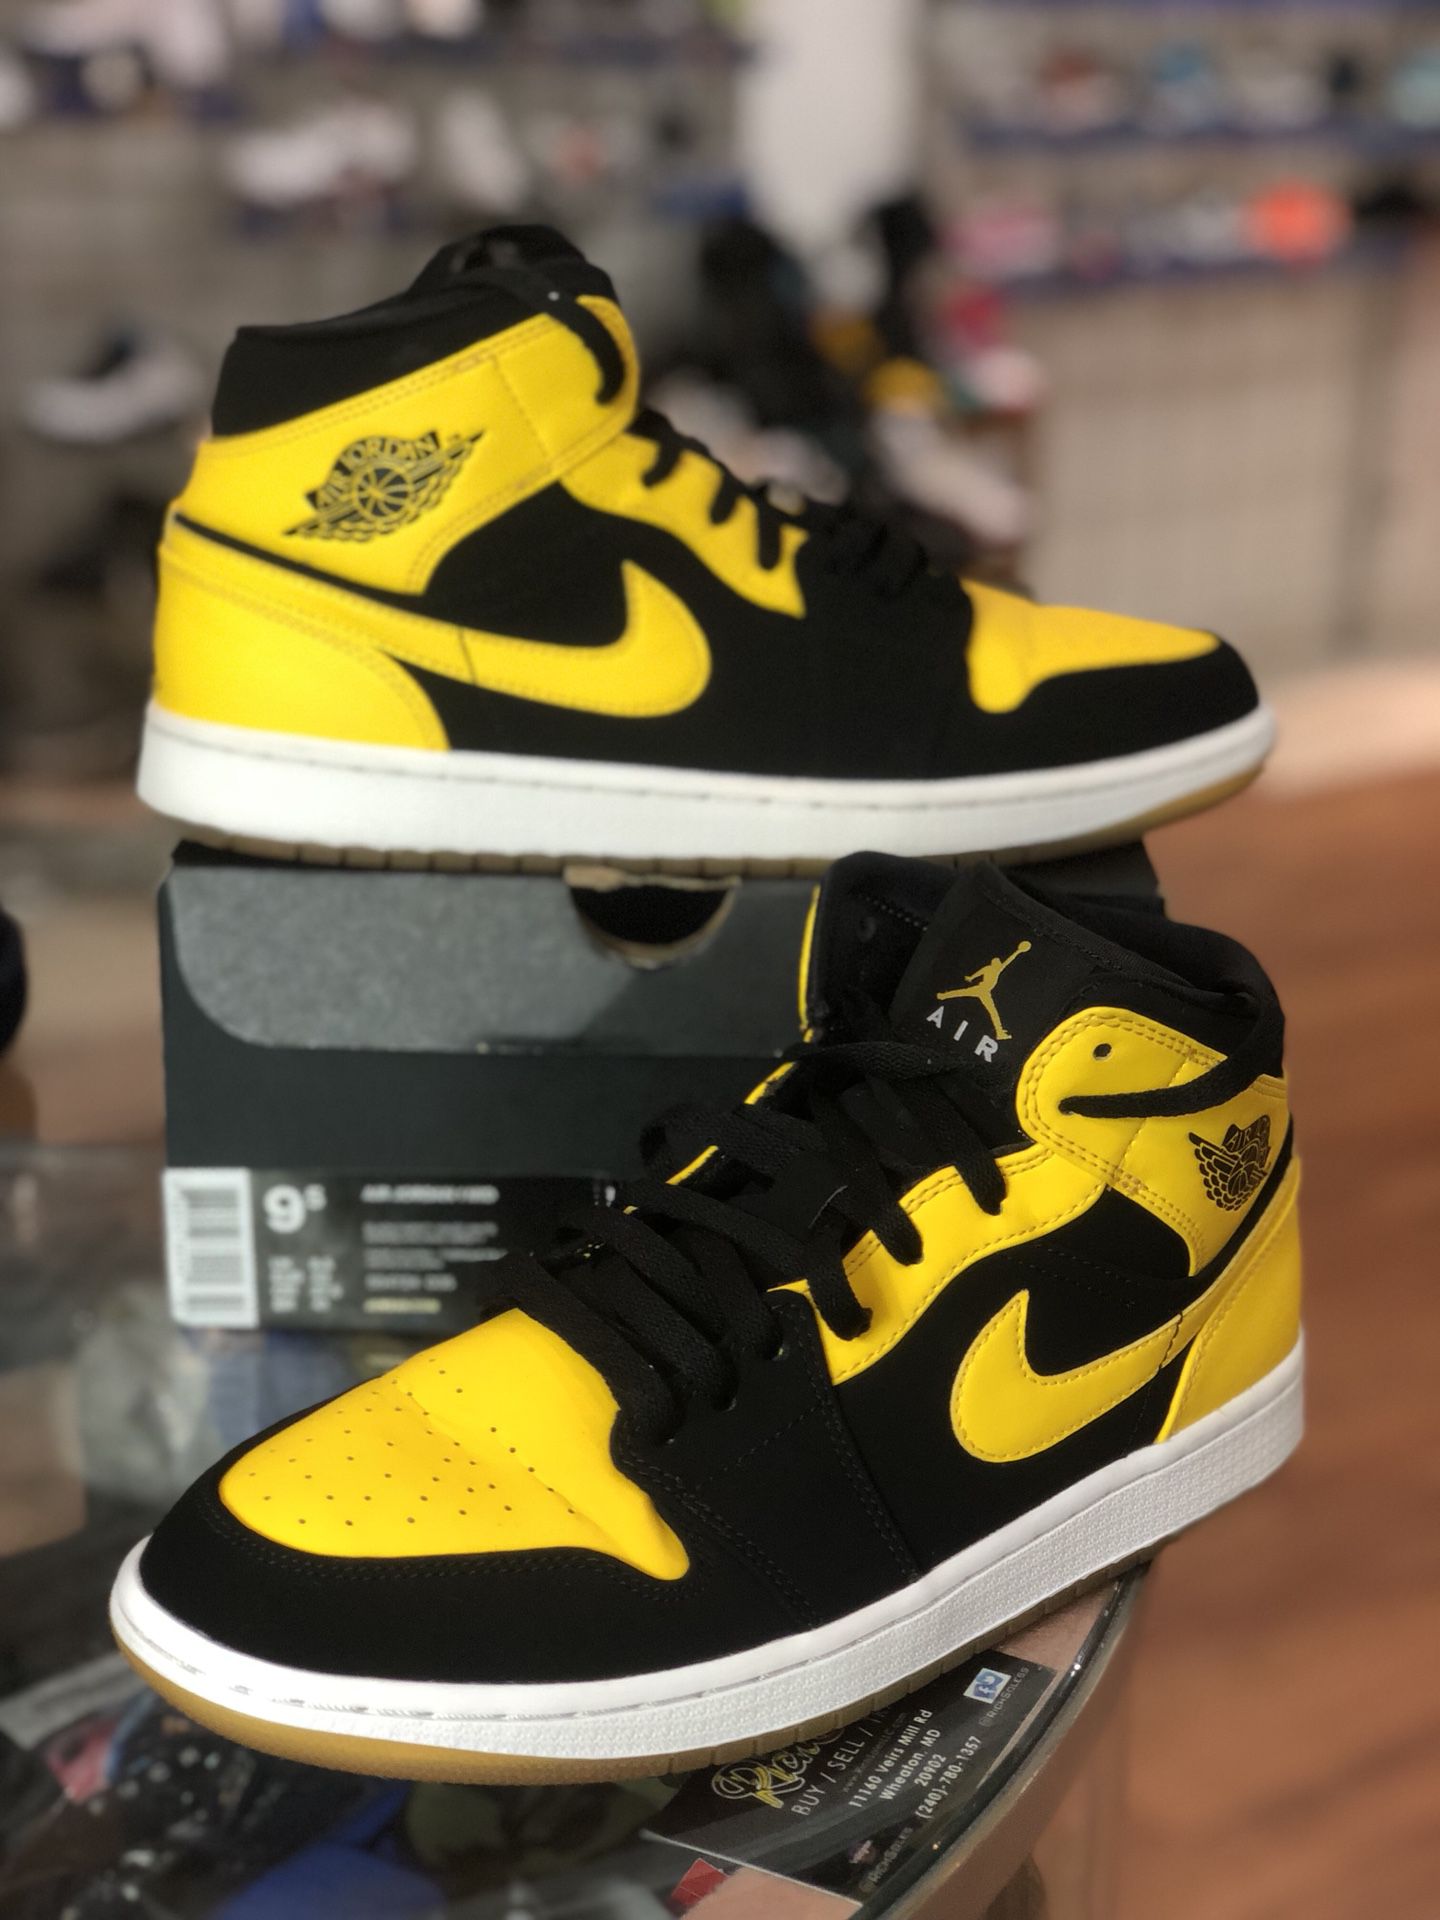 New Love 1s size 9.5